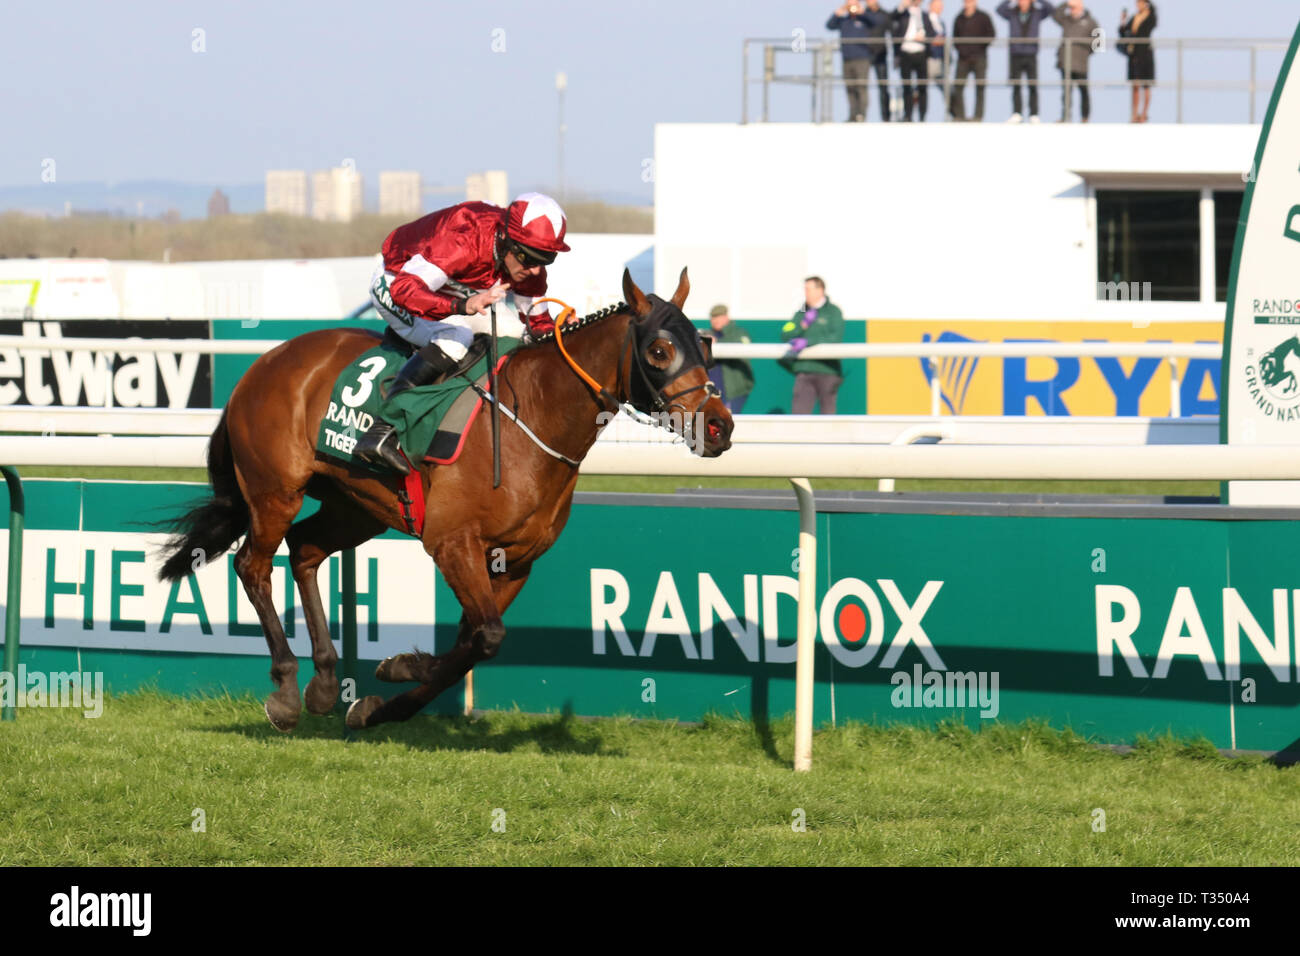 AINTREE, Liverpool, UK. 6th Apr, 2019. Tiger Roll winner of the 2019 Randox Grand National ridden by D N Russell. He becomes the first horse to since Red Rum 45 years ago to win the event race back-to-back. 40 runners, 30 fences and more than four-and-a-quarter miles, the National is the ultimate test for horses and riders. Stock Photo